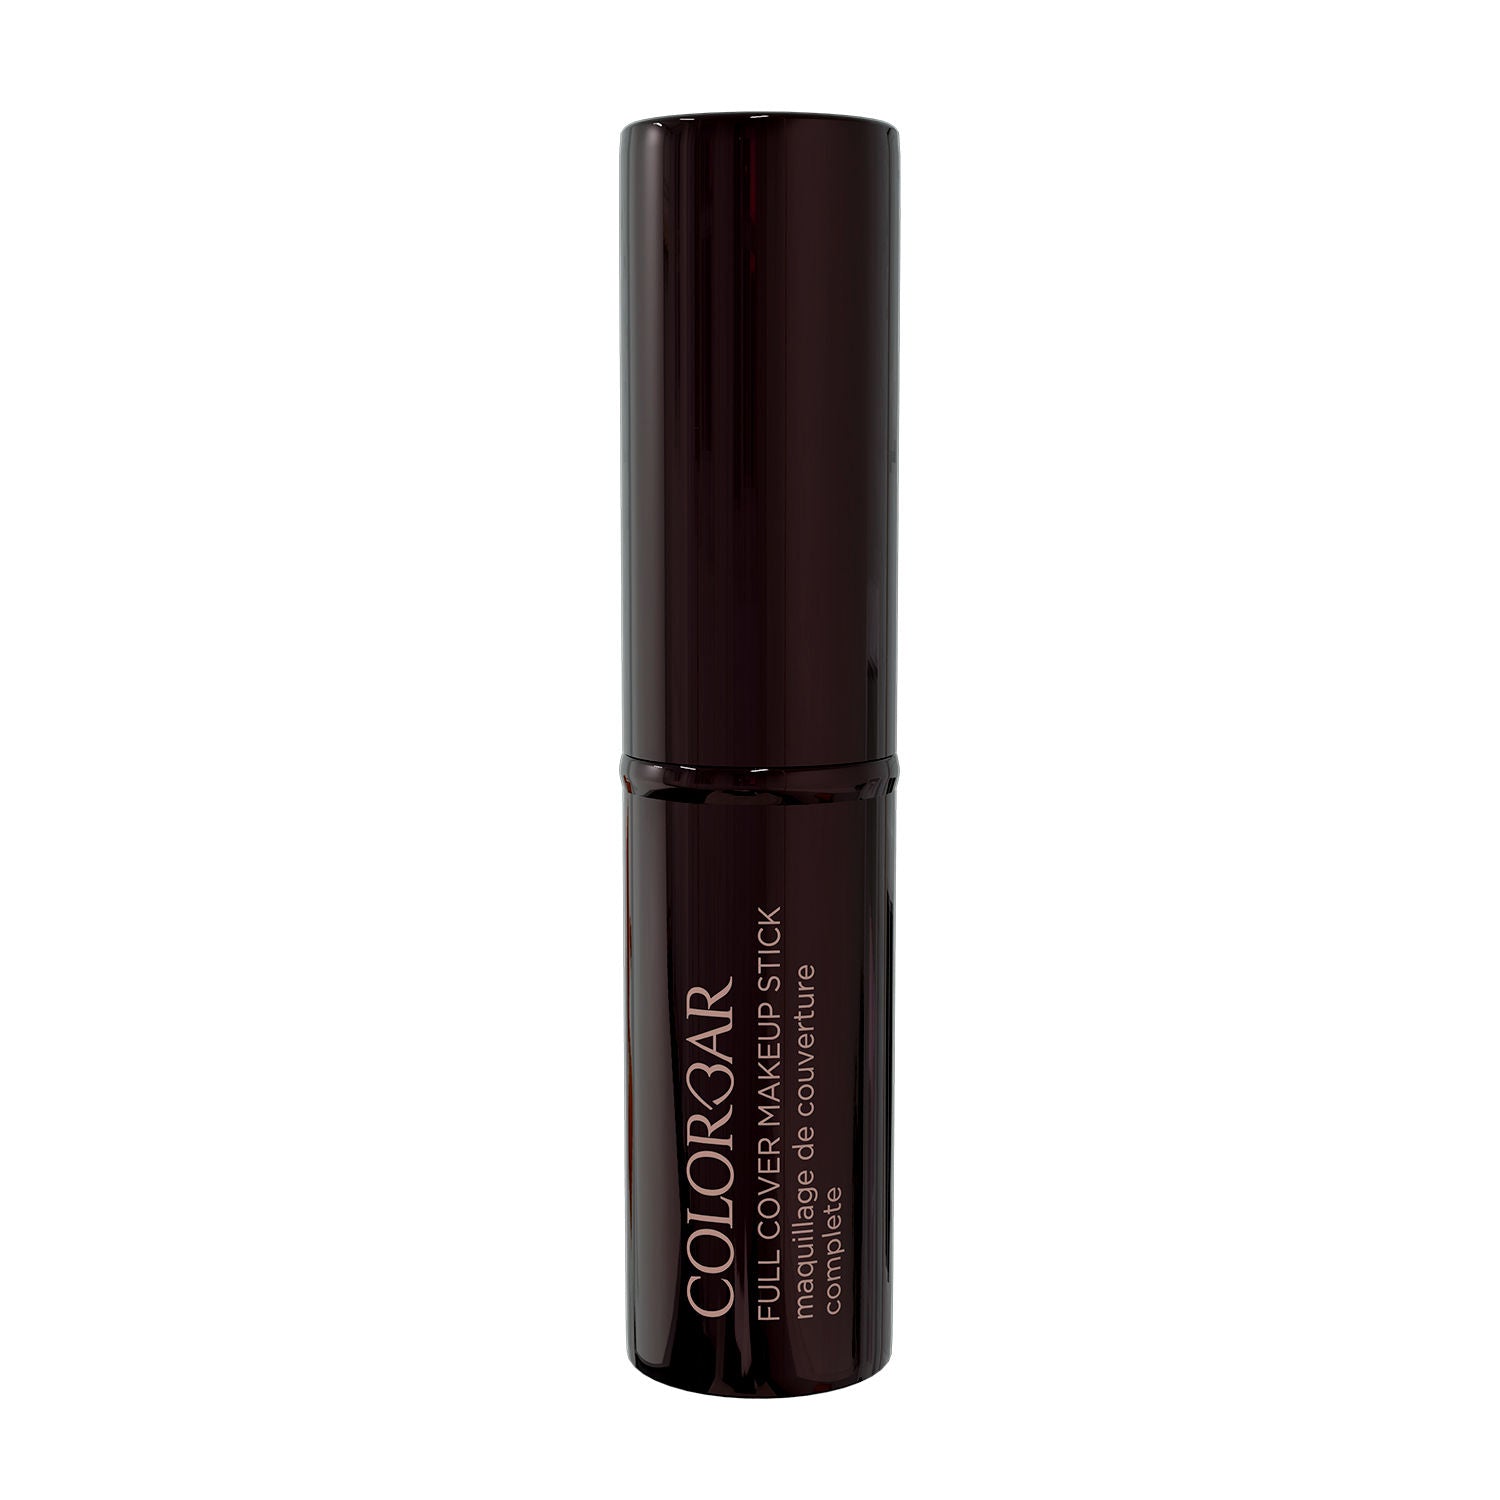 Colorbar Full Cover Makeup Stick With SPF30 002 AU Natural - 9g